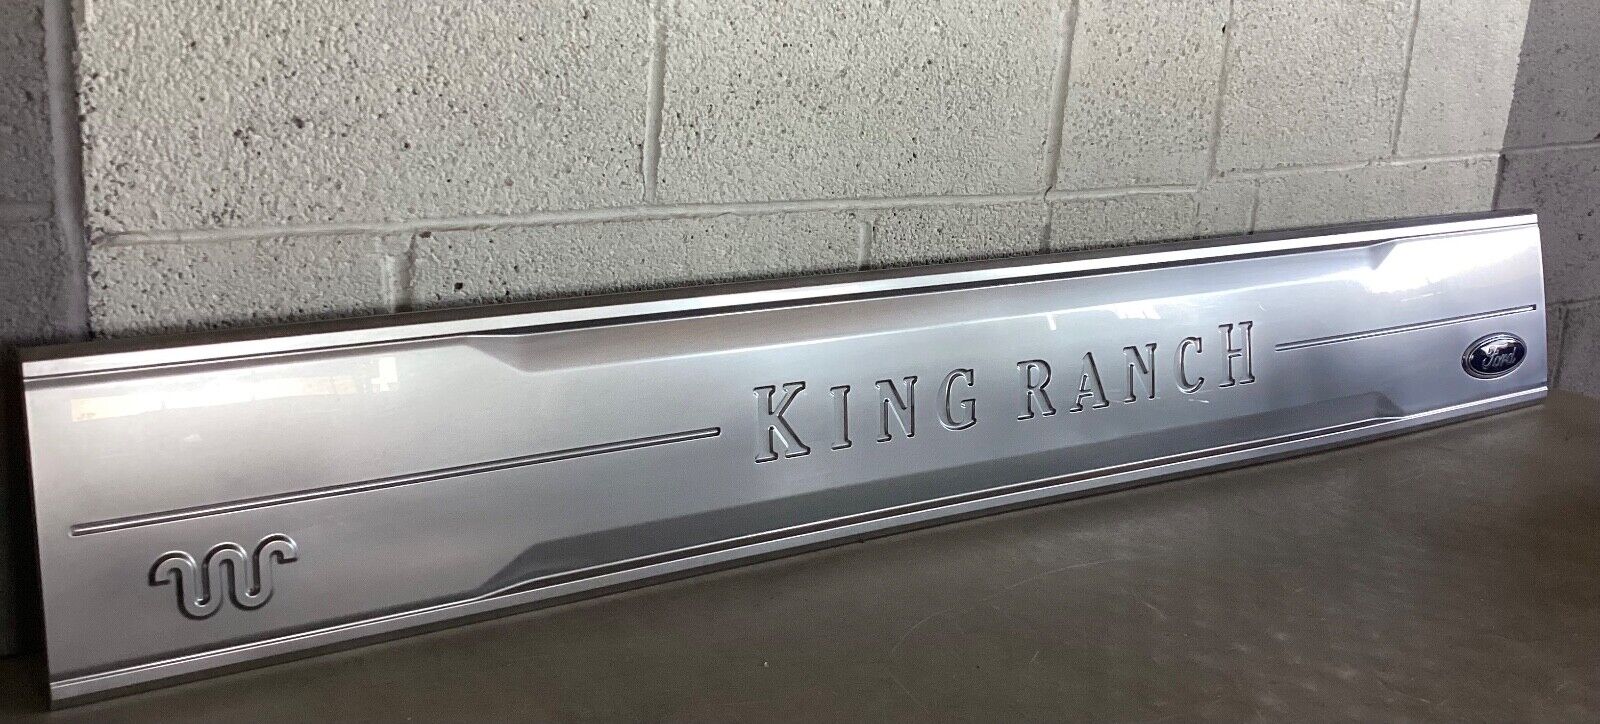 2017 2019 King Ranch 250/350/450 Tailgate Trim Molding COMPLETE✅JC3B-99402A02-CA